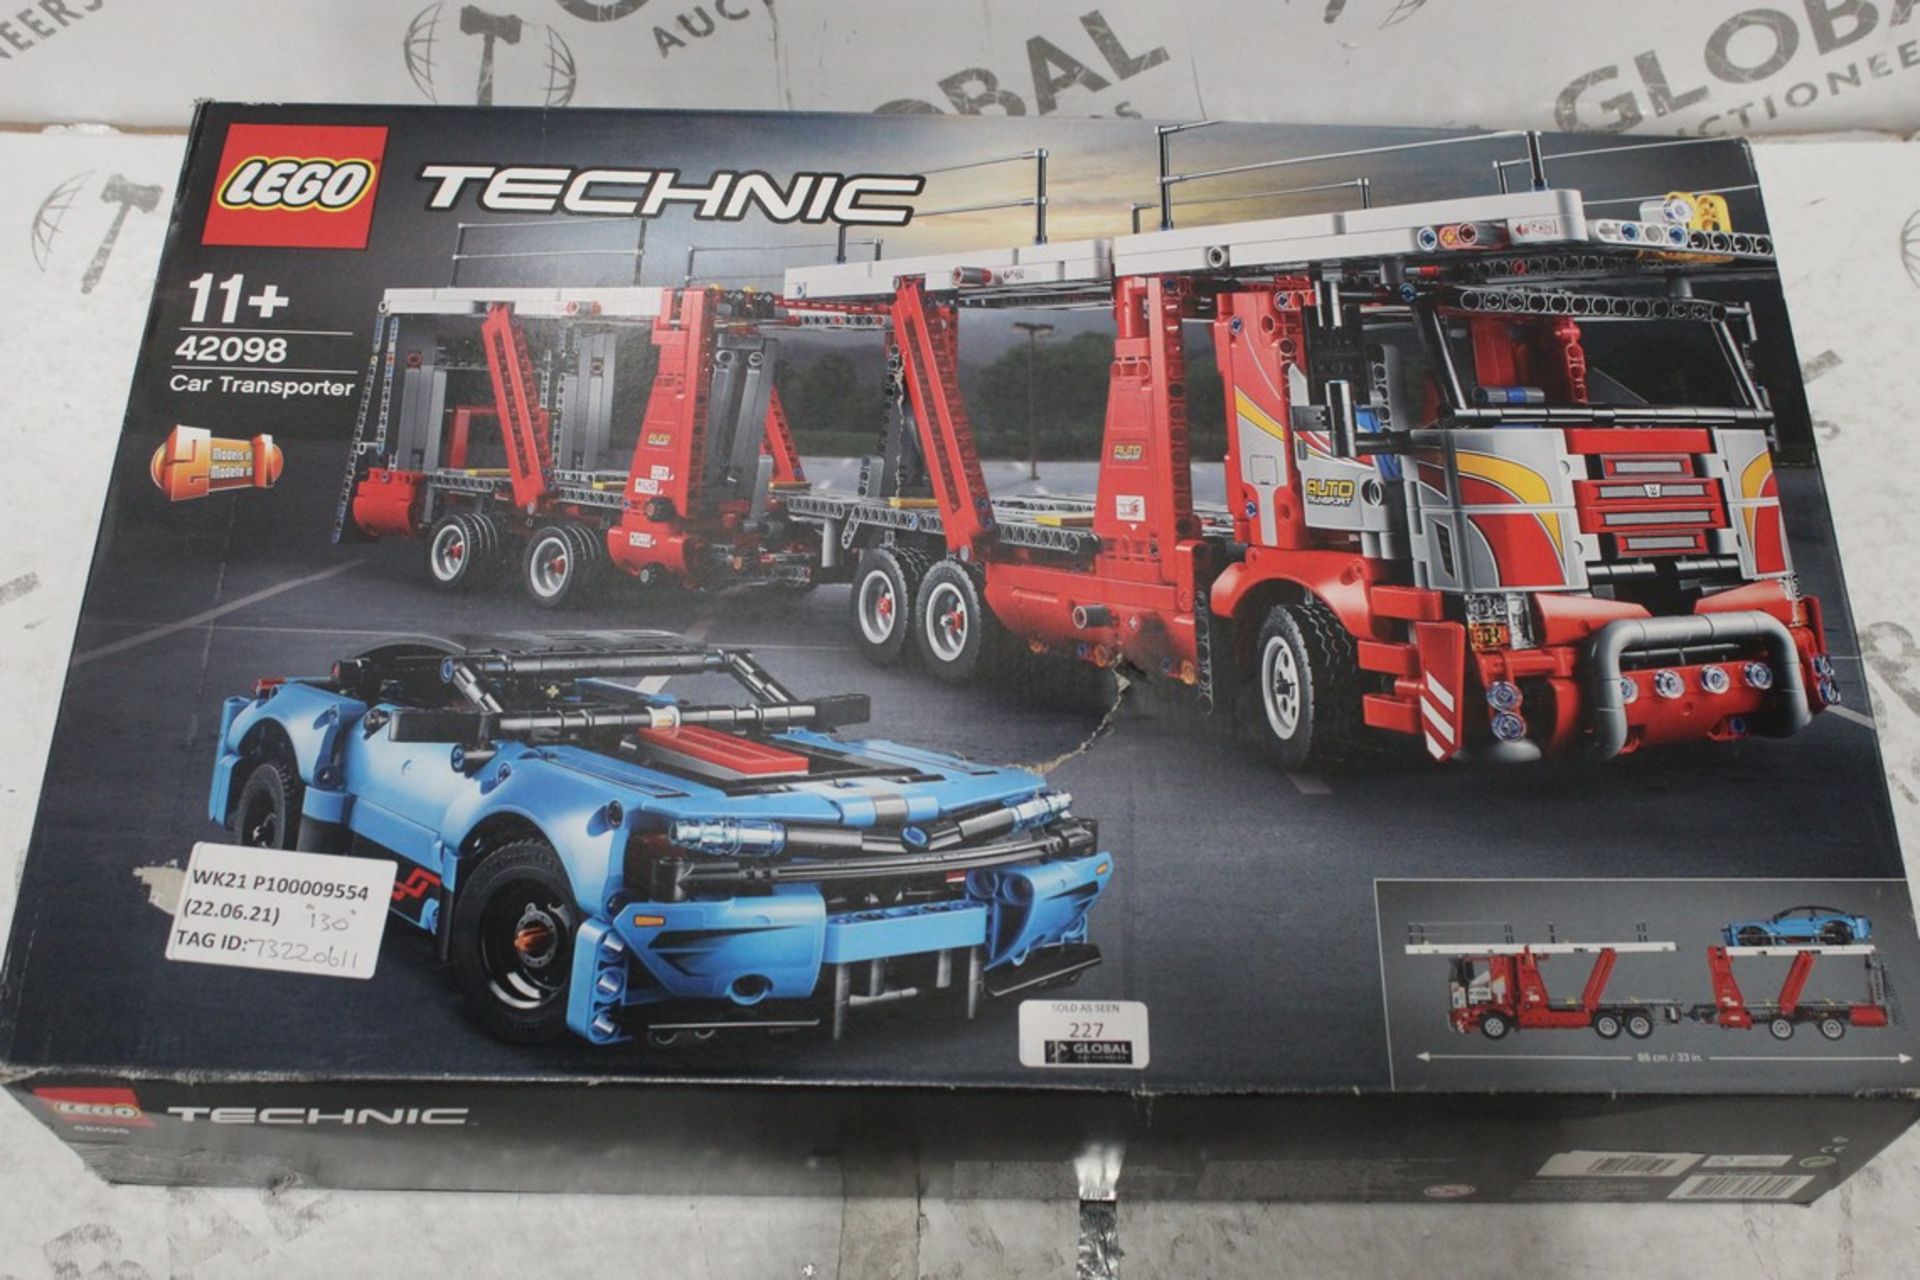 Boxed Lego Technic Car Transporter Pack RRP £130 (73220611) (Pictures Are For Illustration